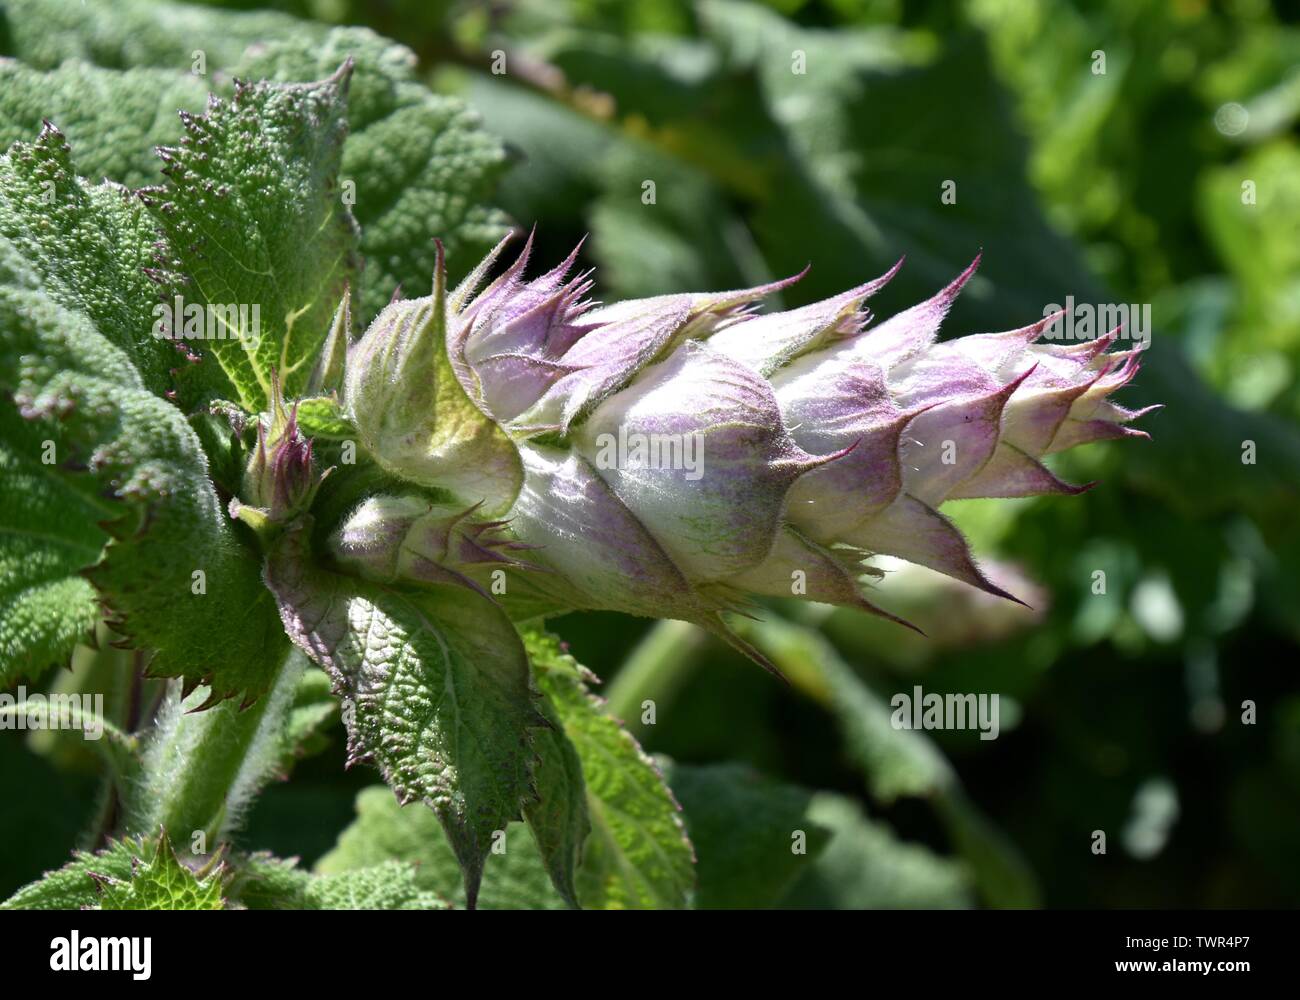 The bloom of the Clary Sage plant. Stock Photo